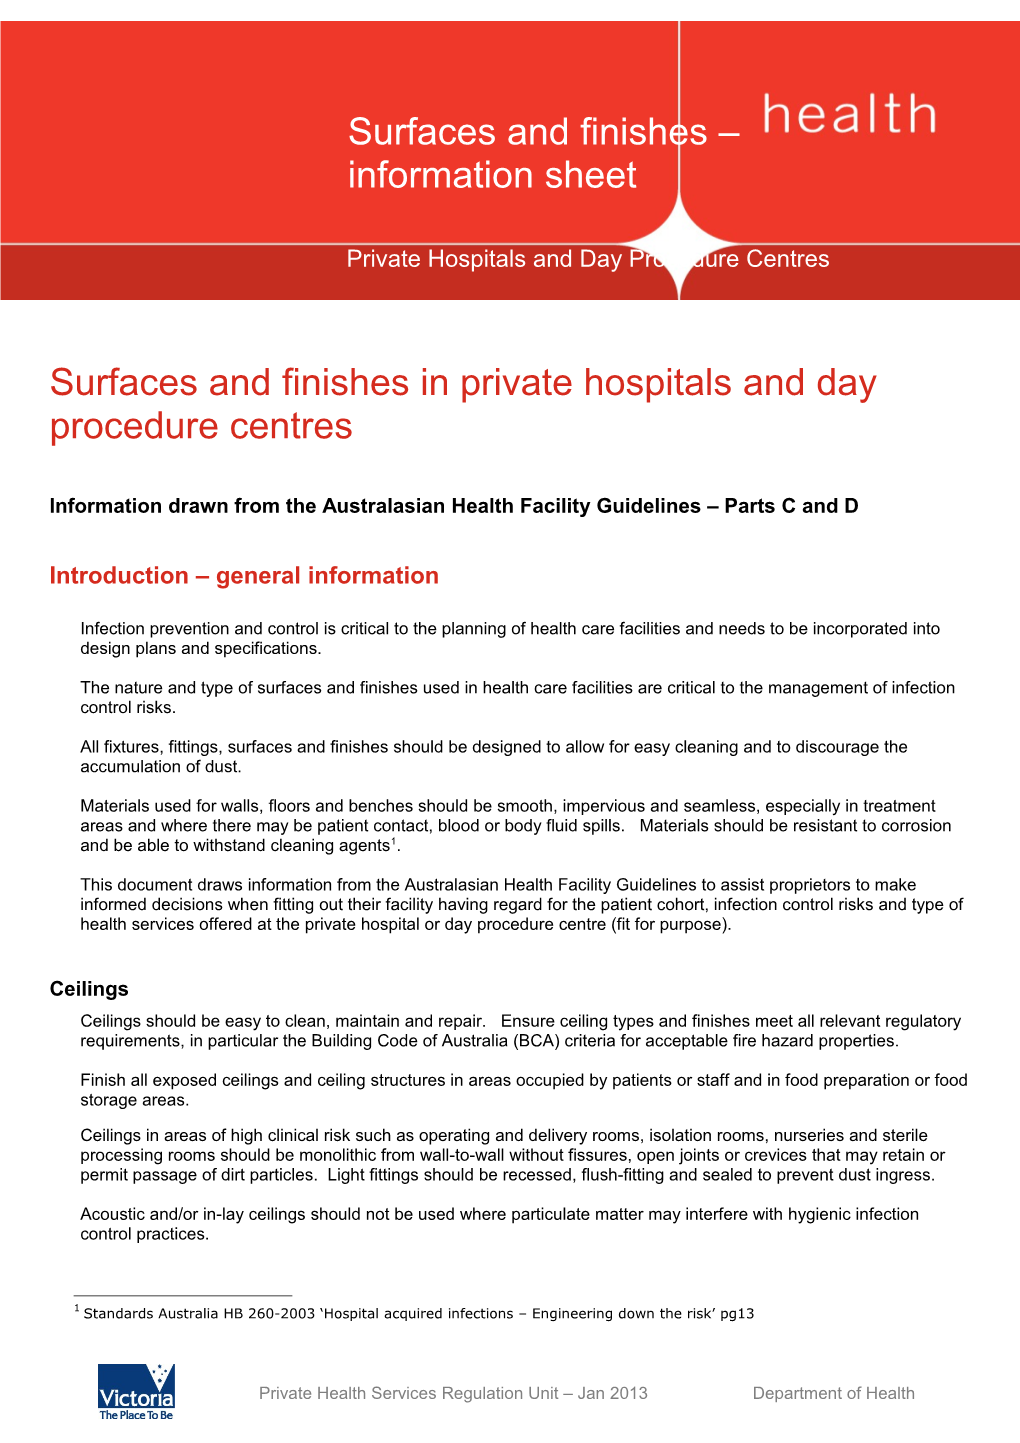 Surfaces and Finishes in Private Hospitals and Day Procedure Centres